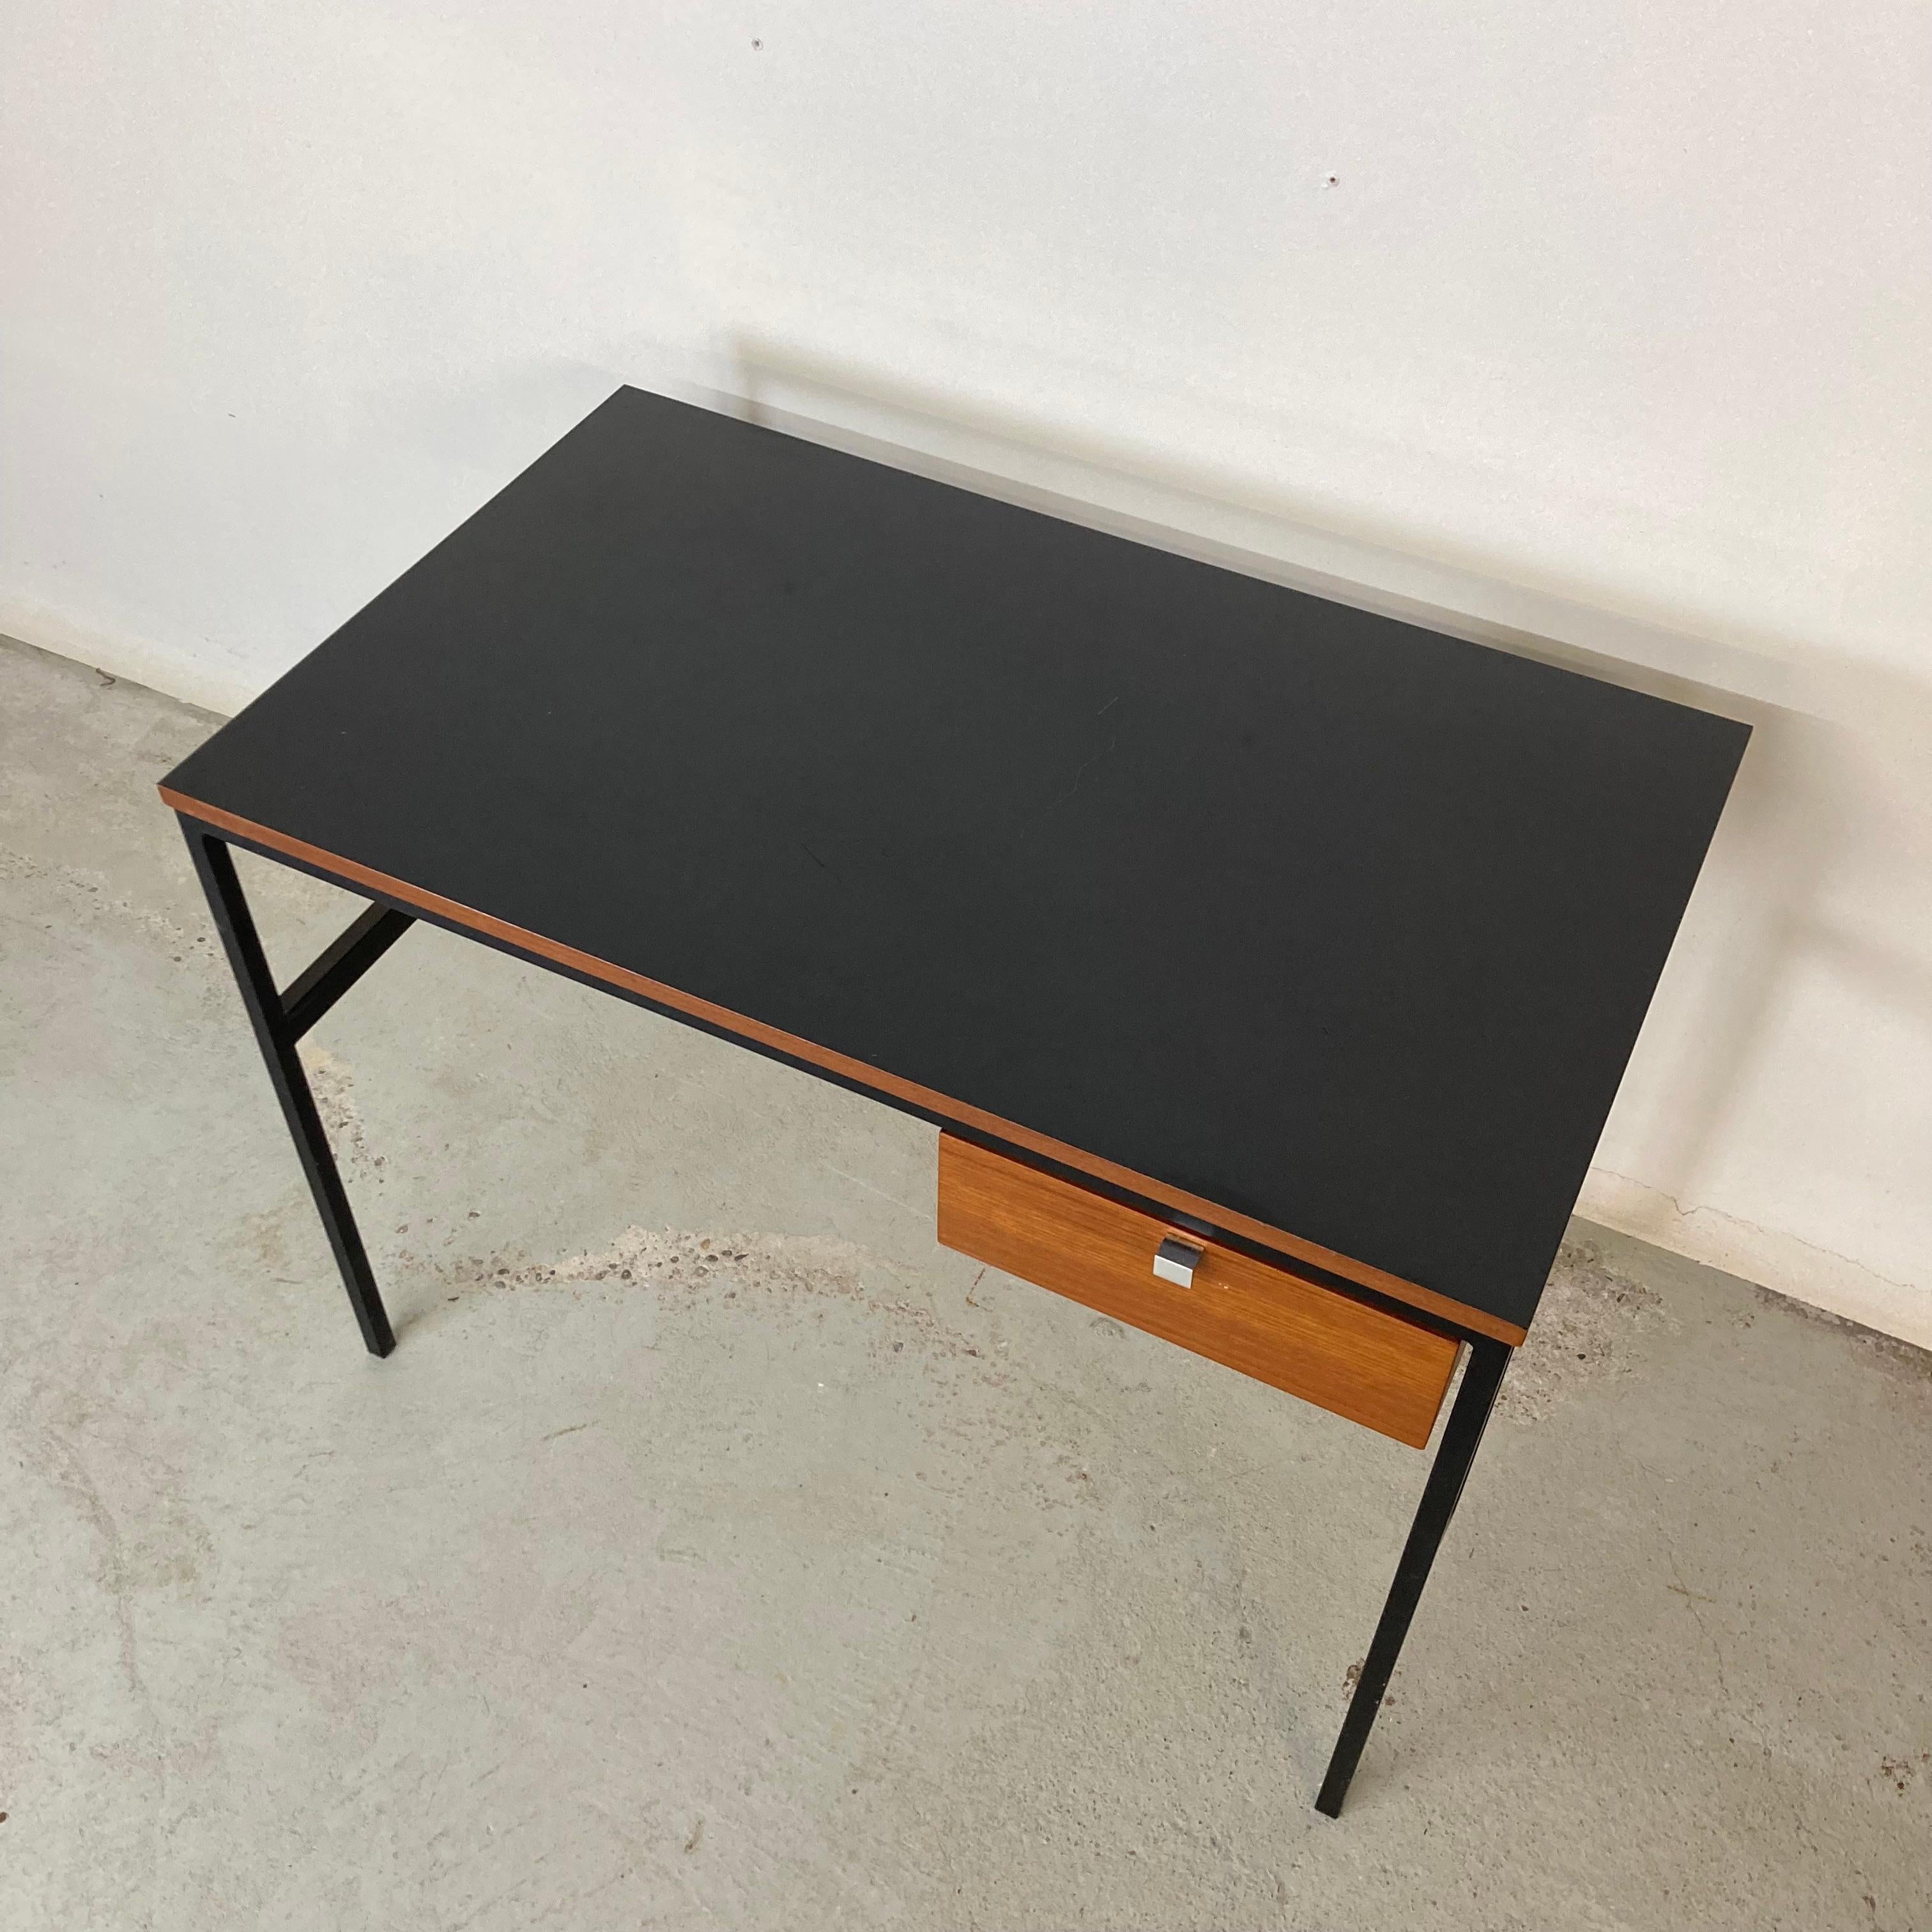 French Pierre Paulin & Thonet Desk with Drawer, Metal Teak & Formica, France Circa 1955 For Sale